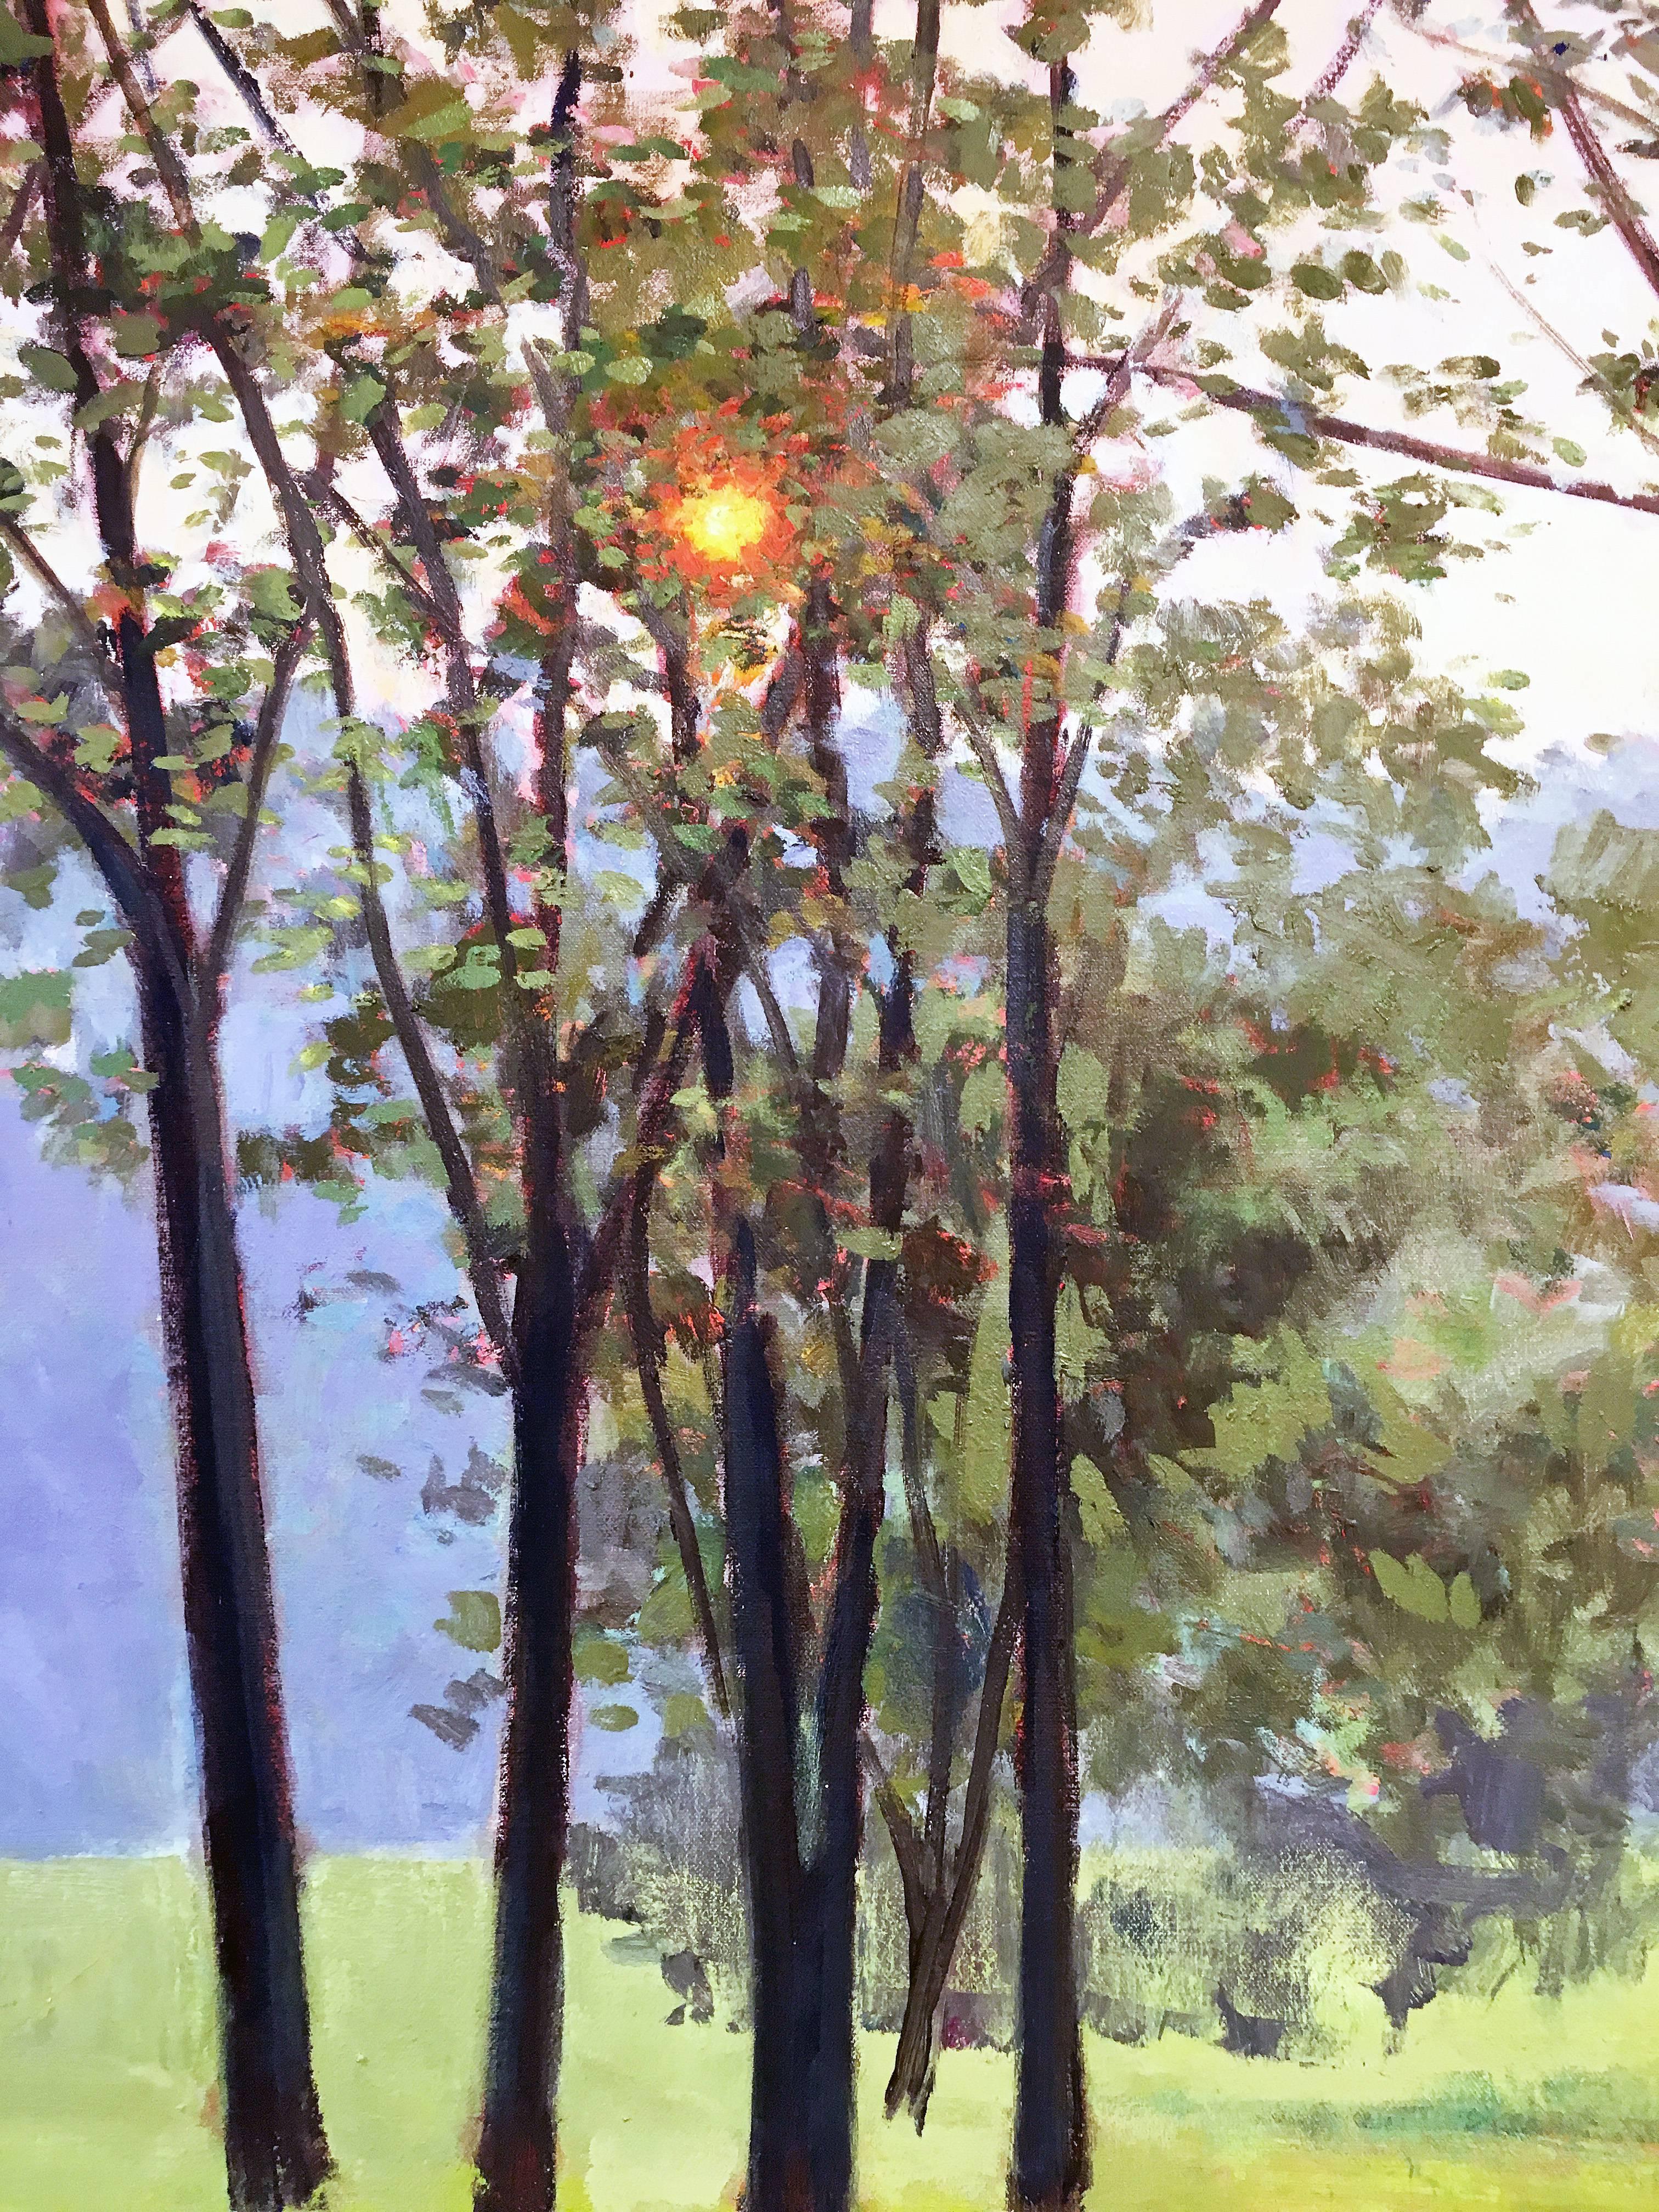 Hazy Woodstock, by Elissa Gore, 2007. Oil on canvas, 25 x 60 inches. A serene and peaceful panoramic view of a lush green field with woods in the background. In the foreground are a grove of trees where the orange sun peeps through. Rich colors of